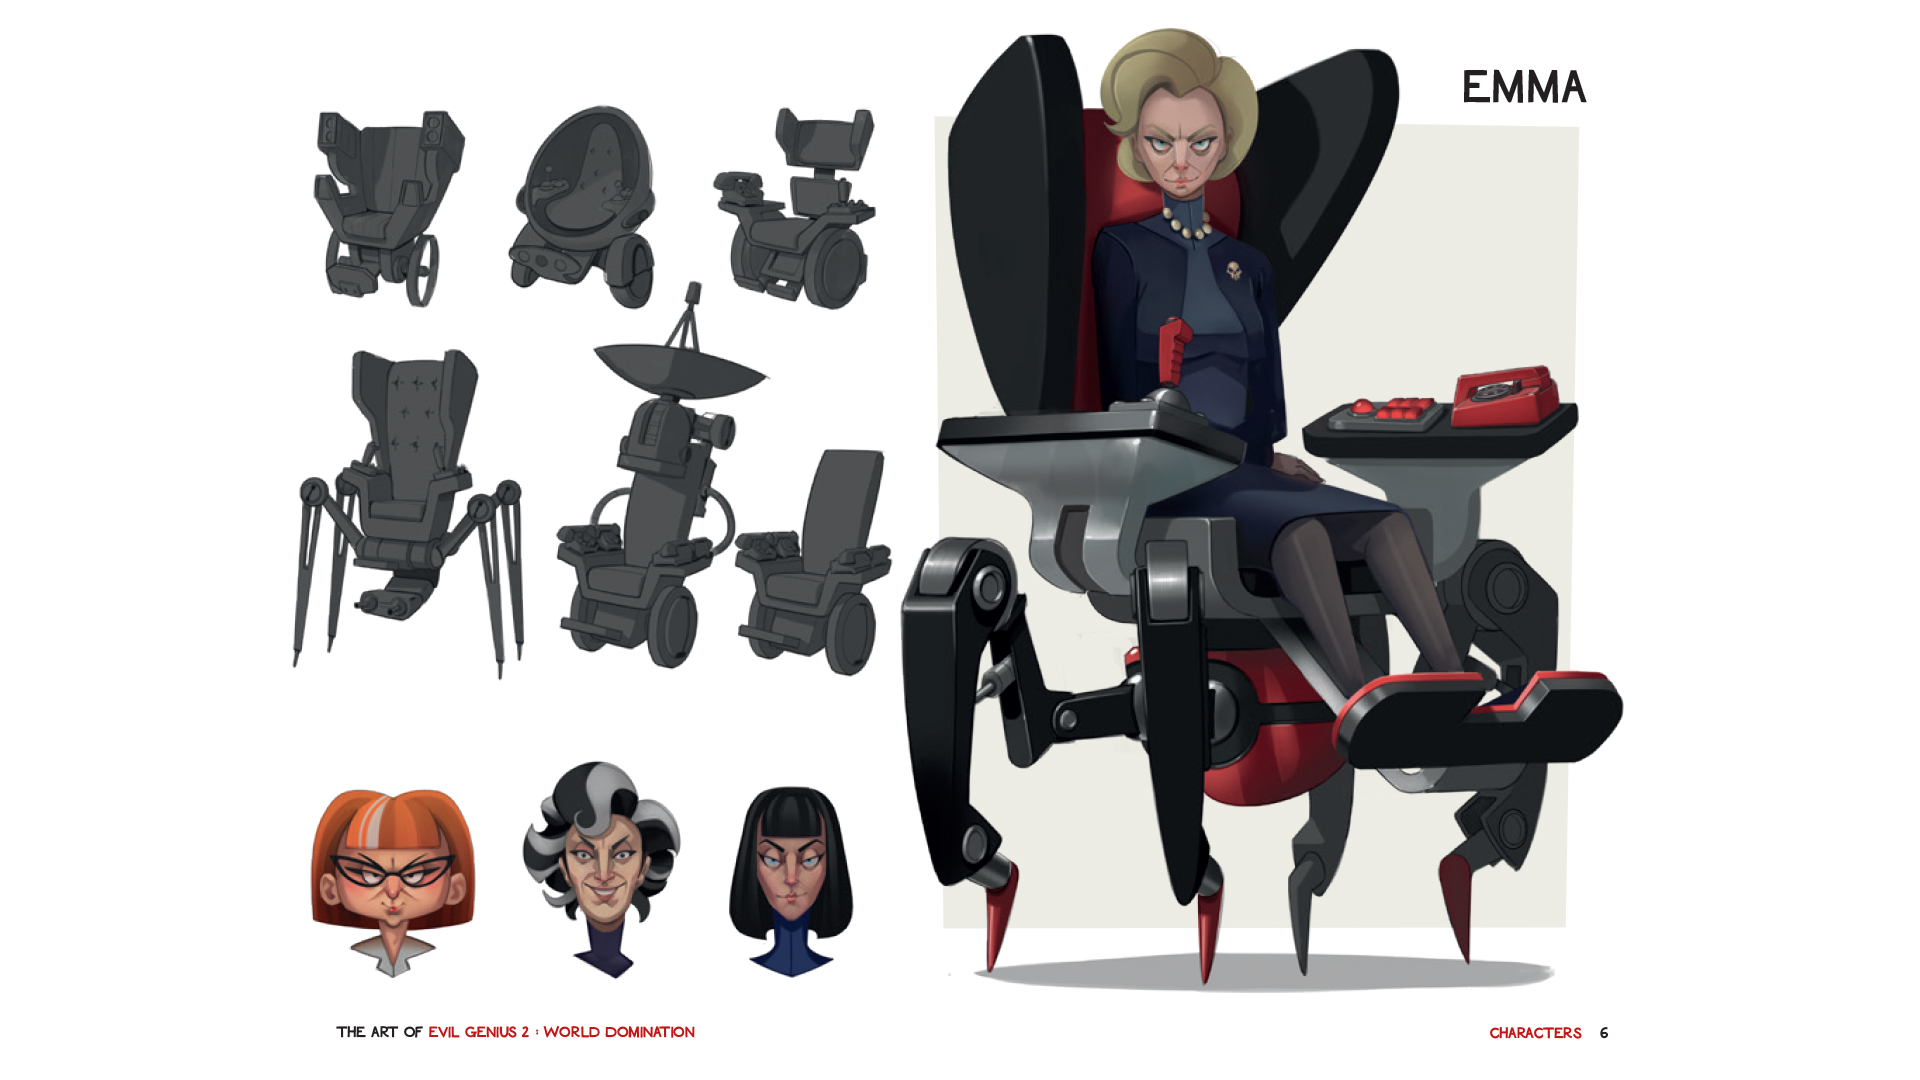 Preview page from the Art of Evil Genius 2 book showing concept art for Emma